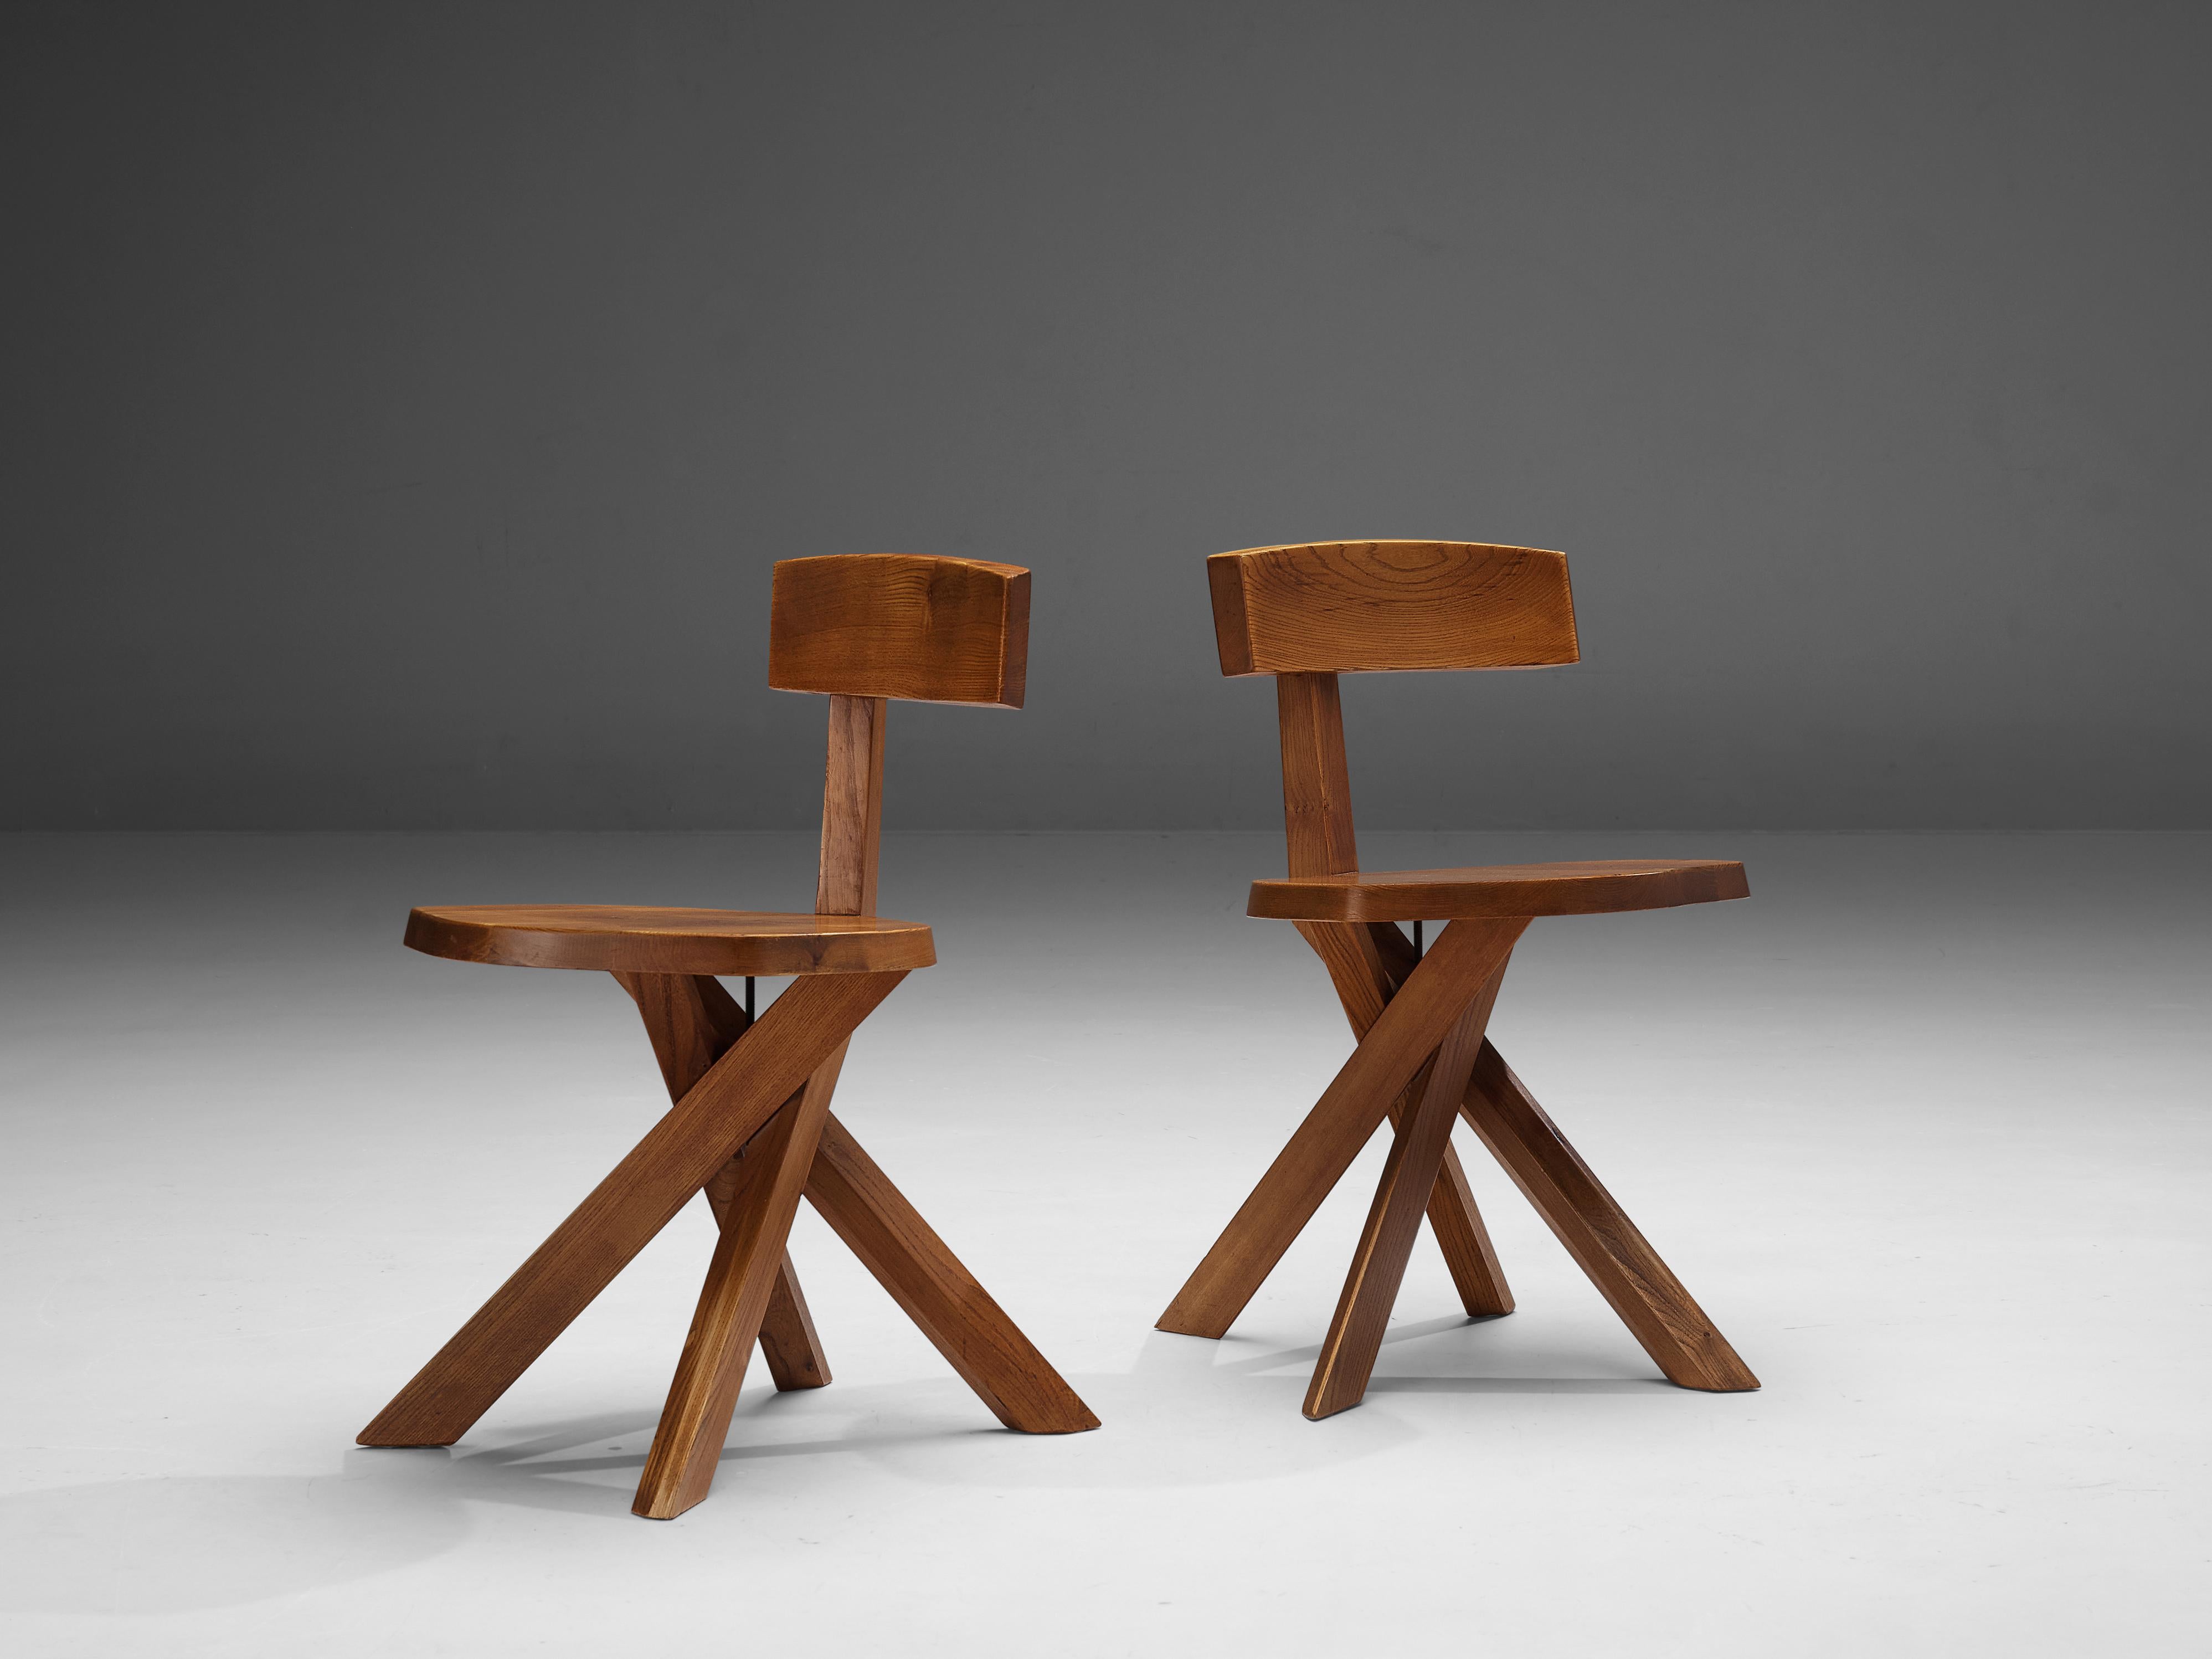 Pierre Chapo, dining chairs model 'S34', elm, France, 1960s

These asymmetrical chairs with a twisted base are true icons of Pierre Chapo's playful and solemn designs. The backrest is placed just slightly out of the middle which strengthens the